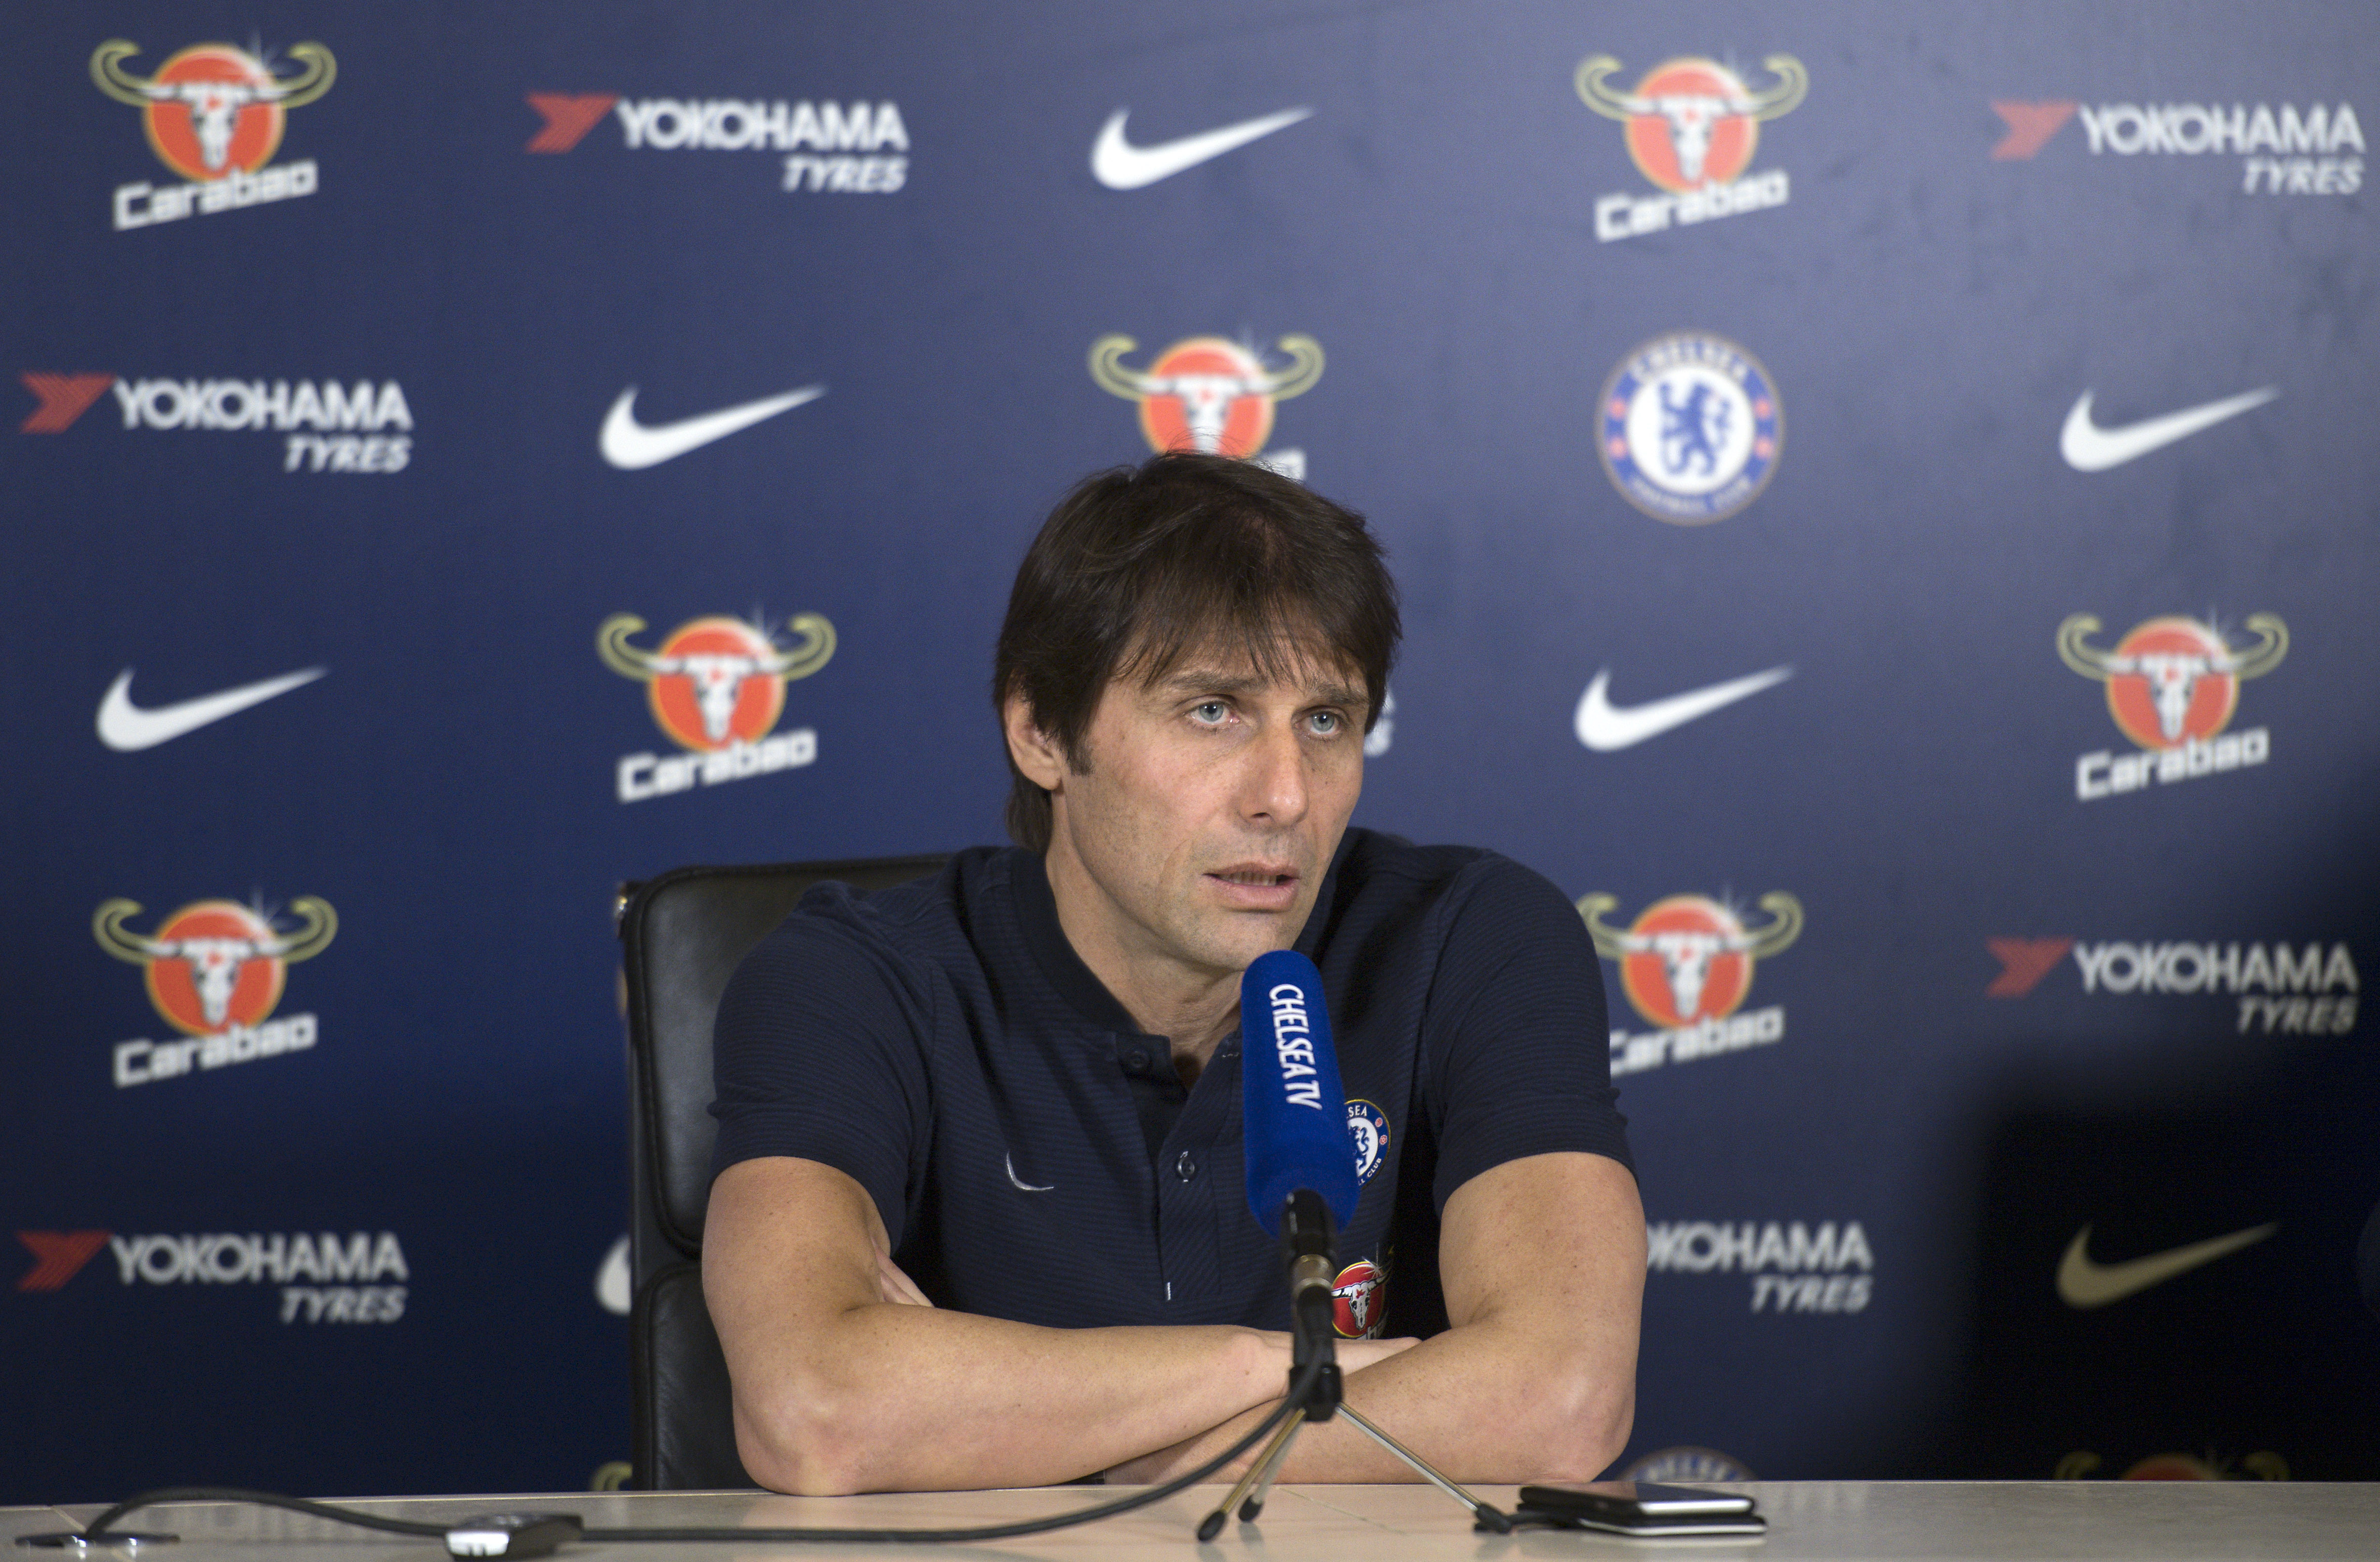 Chelsea's Italian head coach Antonio Conte gives a press conference at Chelsea's Cobham training facility in Stoke D'Abernon, southwest of London, on February 9, 2018 ahead of their English Premier League football match against West Bromwich Albion. / AFP PHOTO / Justin TALLIS / RESTRICTED TO EDITORIAL USE. No use with unauthorized audio, video, data, fixture lists, club/league logos or 'live' services. Online in-match use limited to 75 images, no video emulation. No use in betting, games or single club/league/player publications.  /         (Photo credit should read JUSTIN TALLIS/AFP/Getty Images)